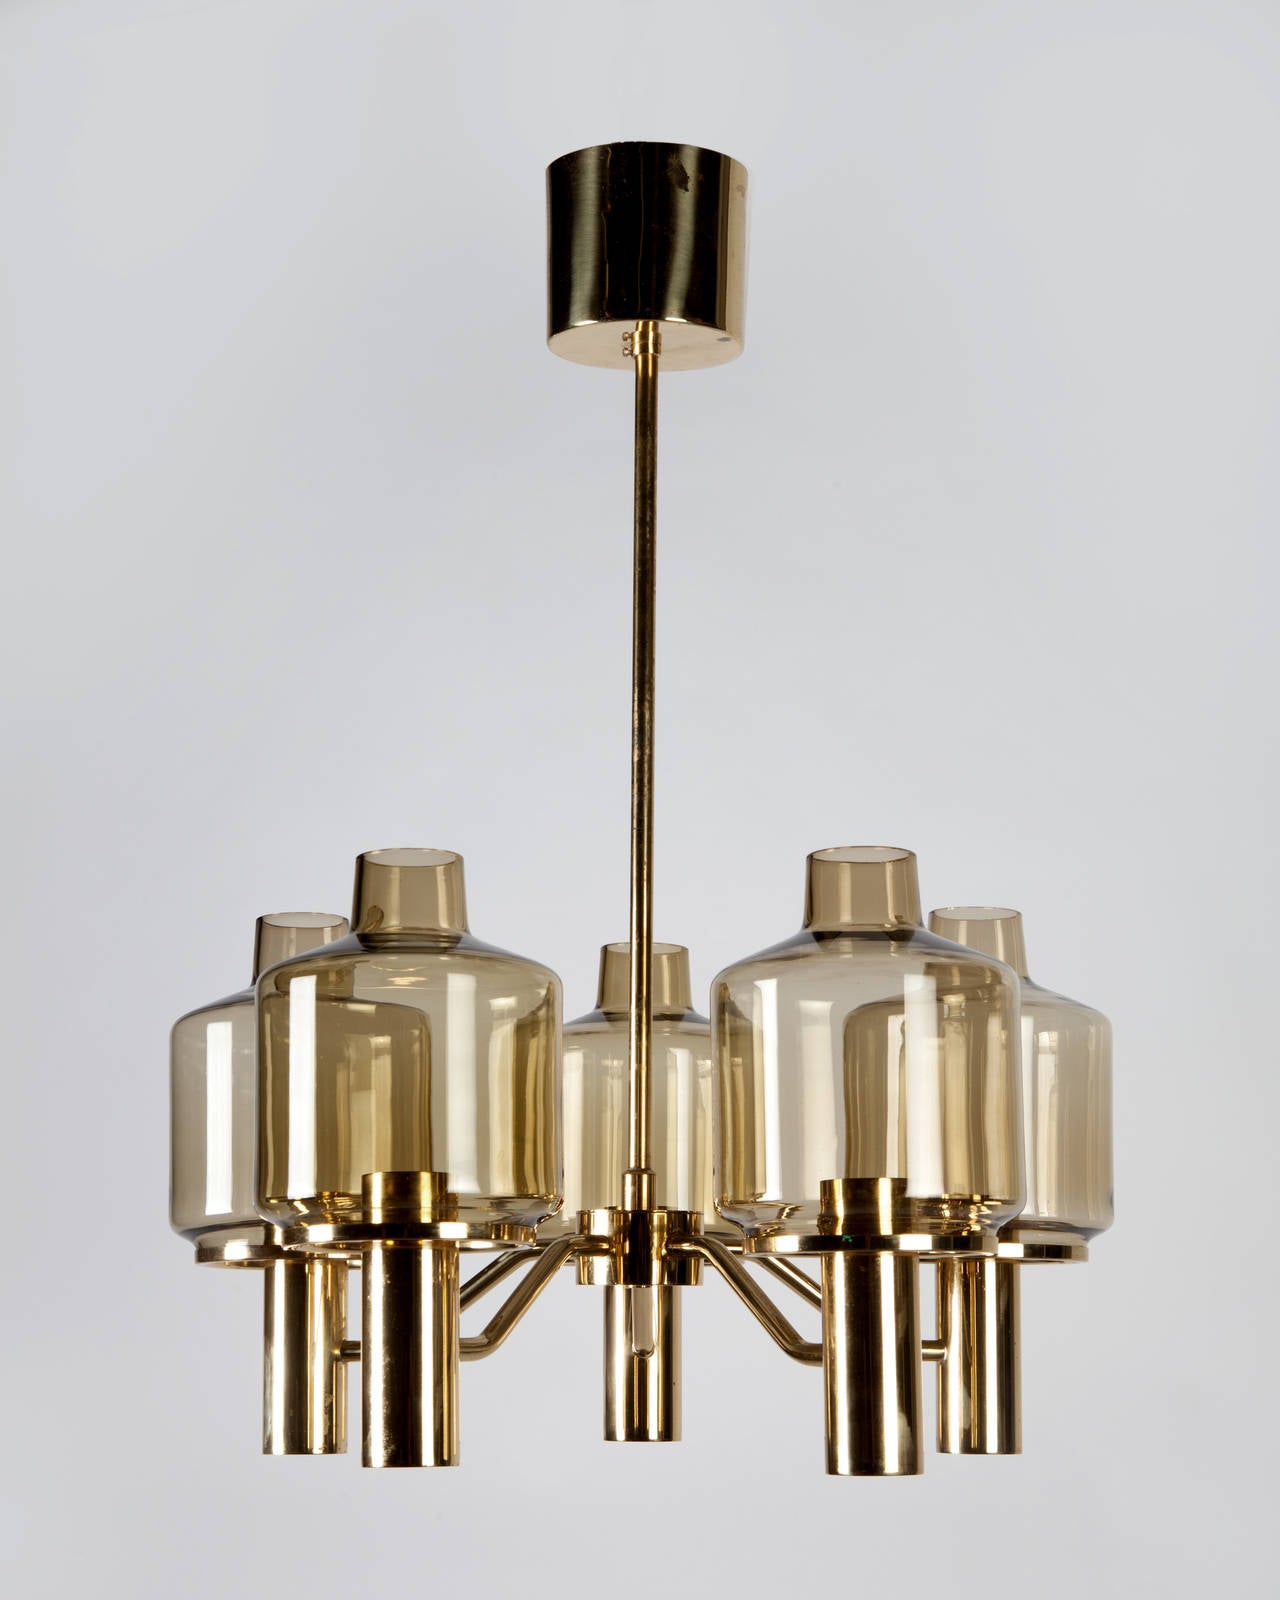 AHL3893

A vintage five-light chandelier with smoked glass ampoule shades in its original lacquered brass finish. By the Swedish maker Hans-Agne Jakobsson. Due to the antique nature of this fixture, there may be some nicks or imperfections in the